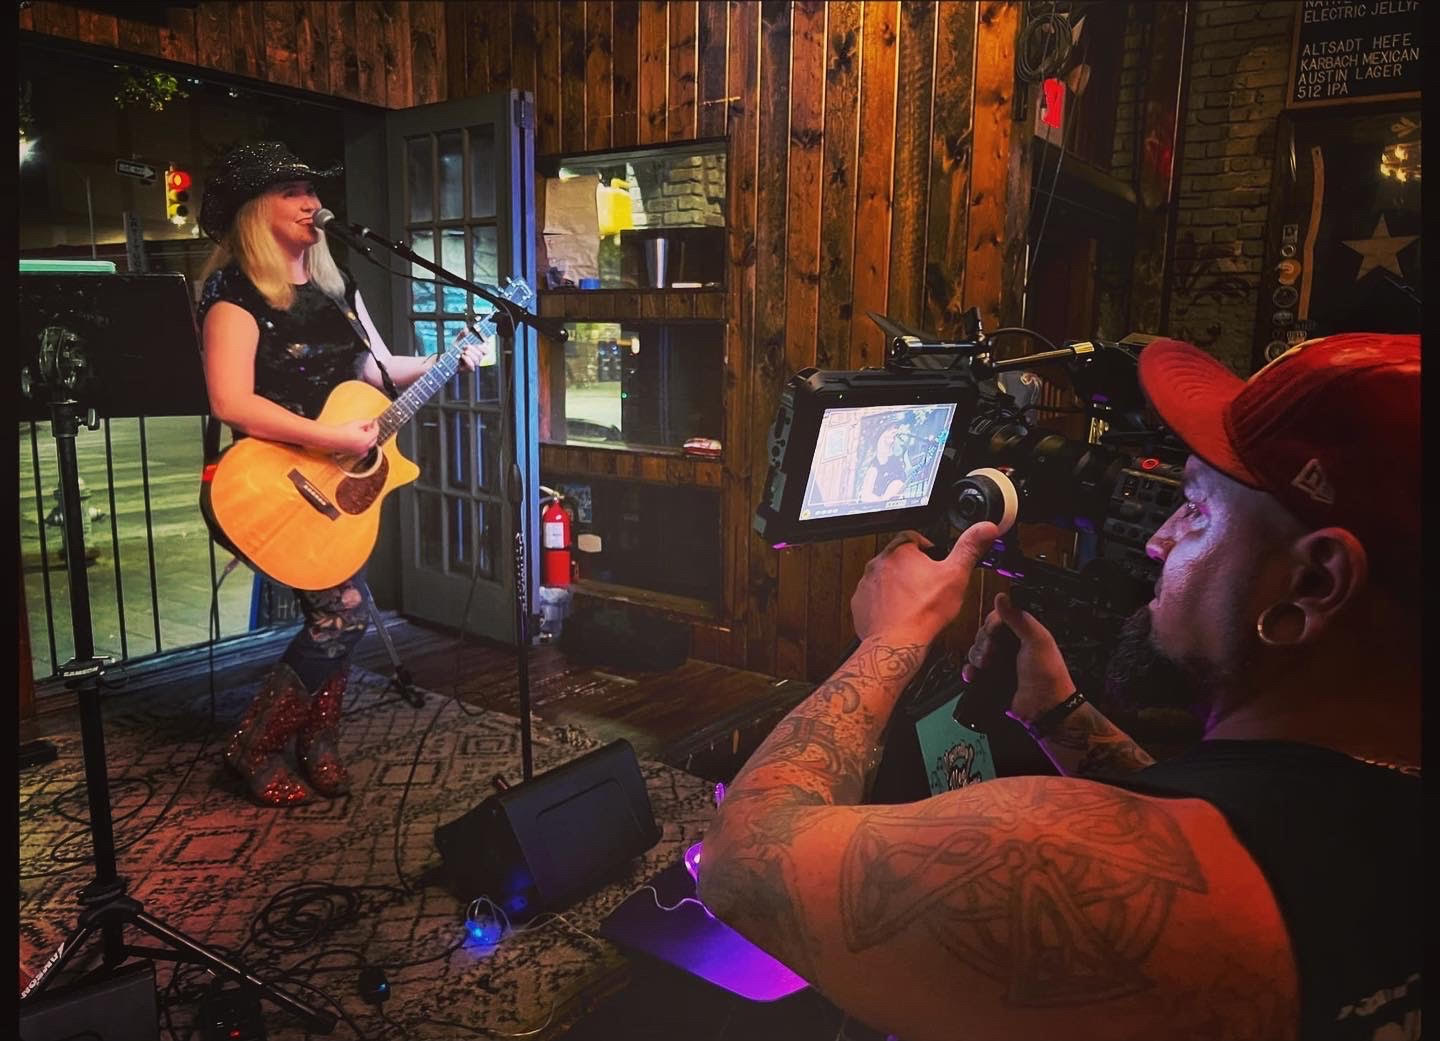 Meg Groves performing in front of a crowd. This photo is a Behind The Scenes look at her new music video, "Thank You Letter."